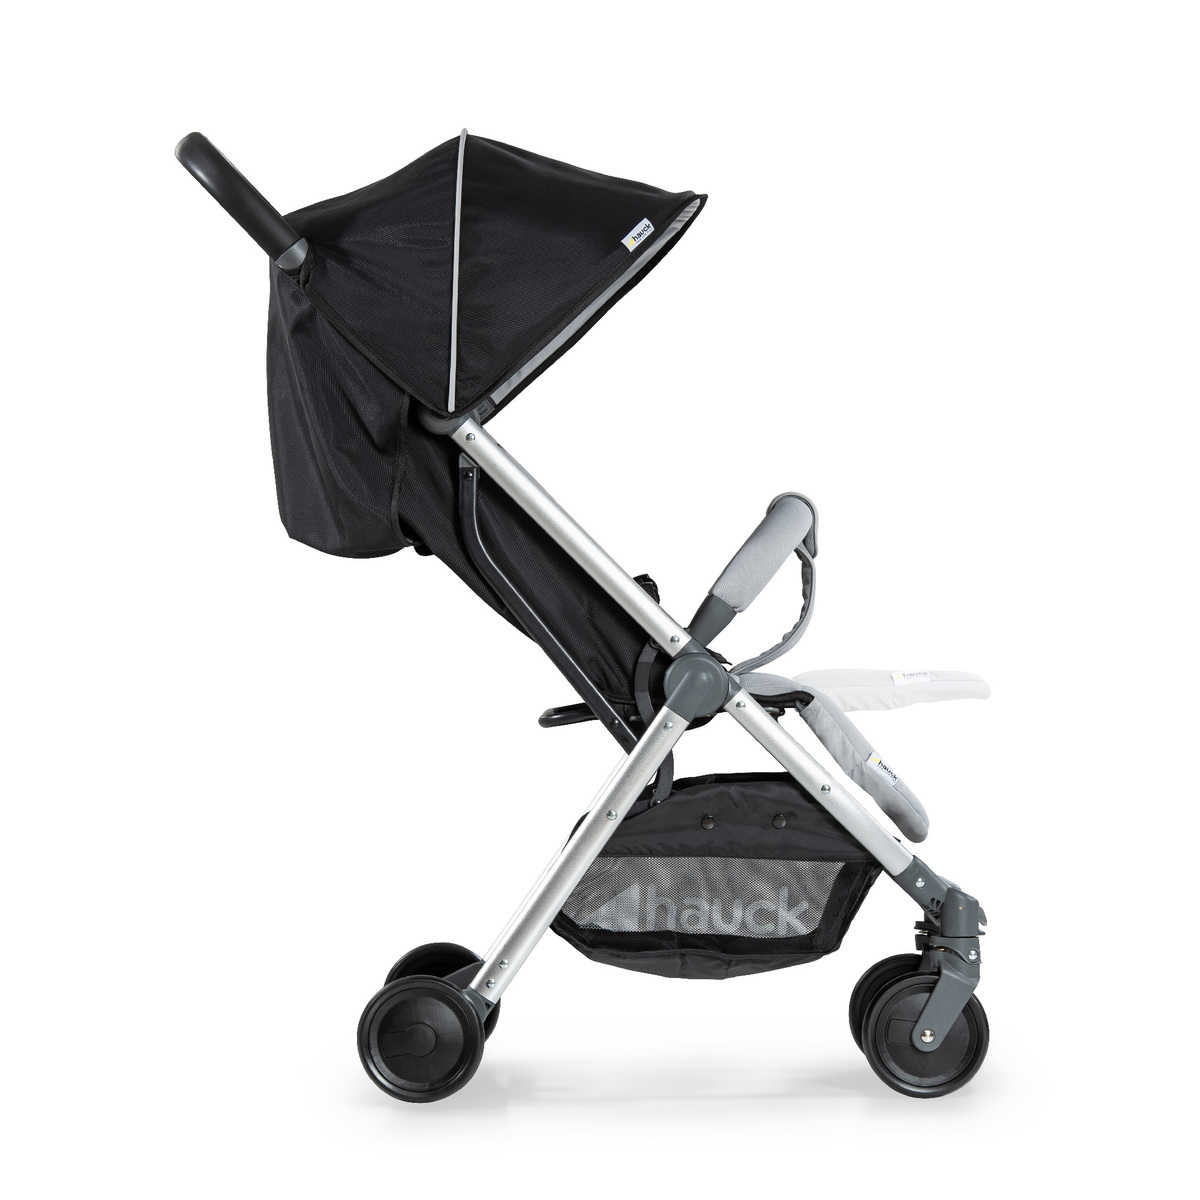 Hauck Baby Stroller 16012 Swift Plus Silver Charcoal